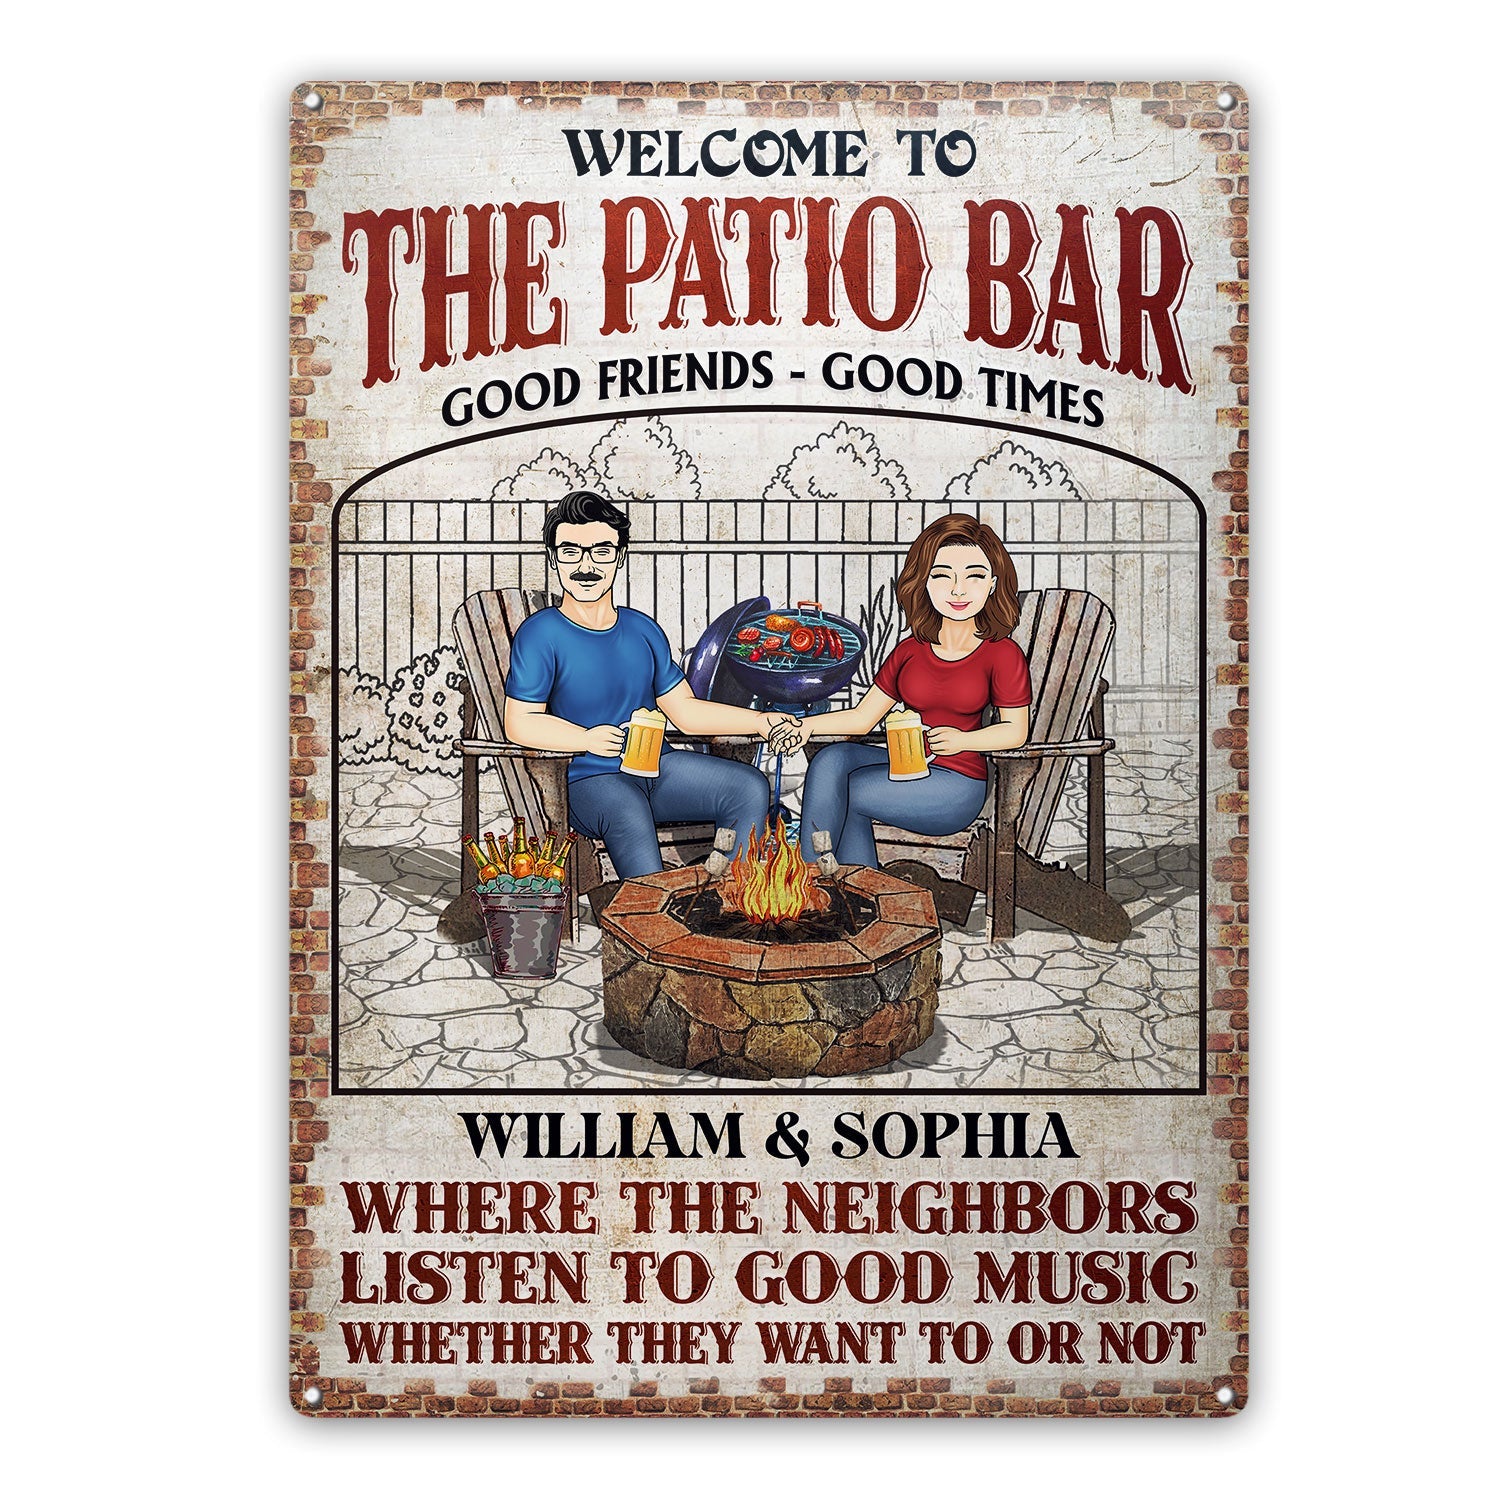 Backyard Patio Where The Neighbors Listen To Good Music - Anniversary, Birthday, Outdoor, Home Decor Gift For Spouse, Lover, Husband, Wife, Couple, Family - Personalized Custom Classic Metal Signs